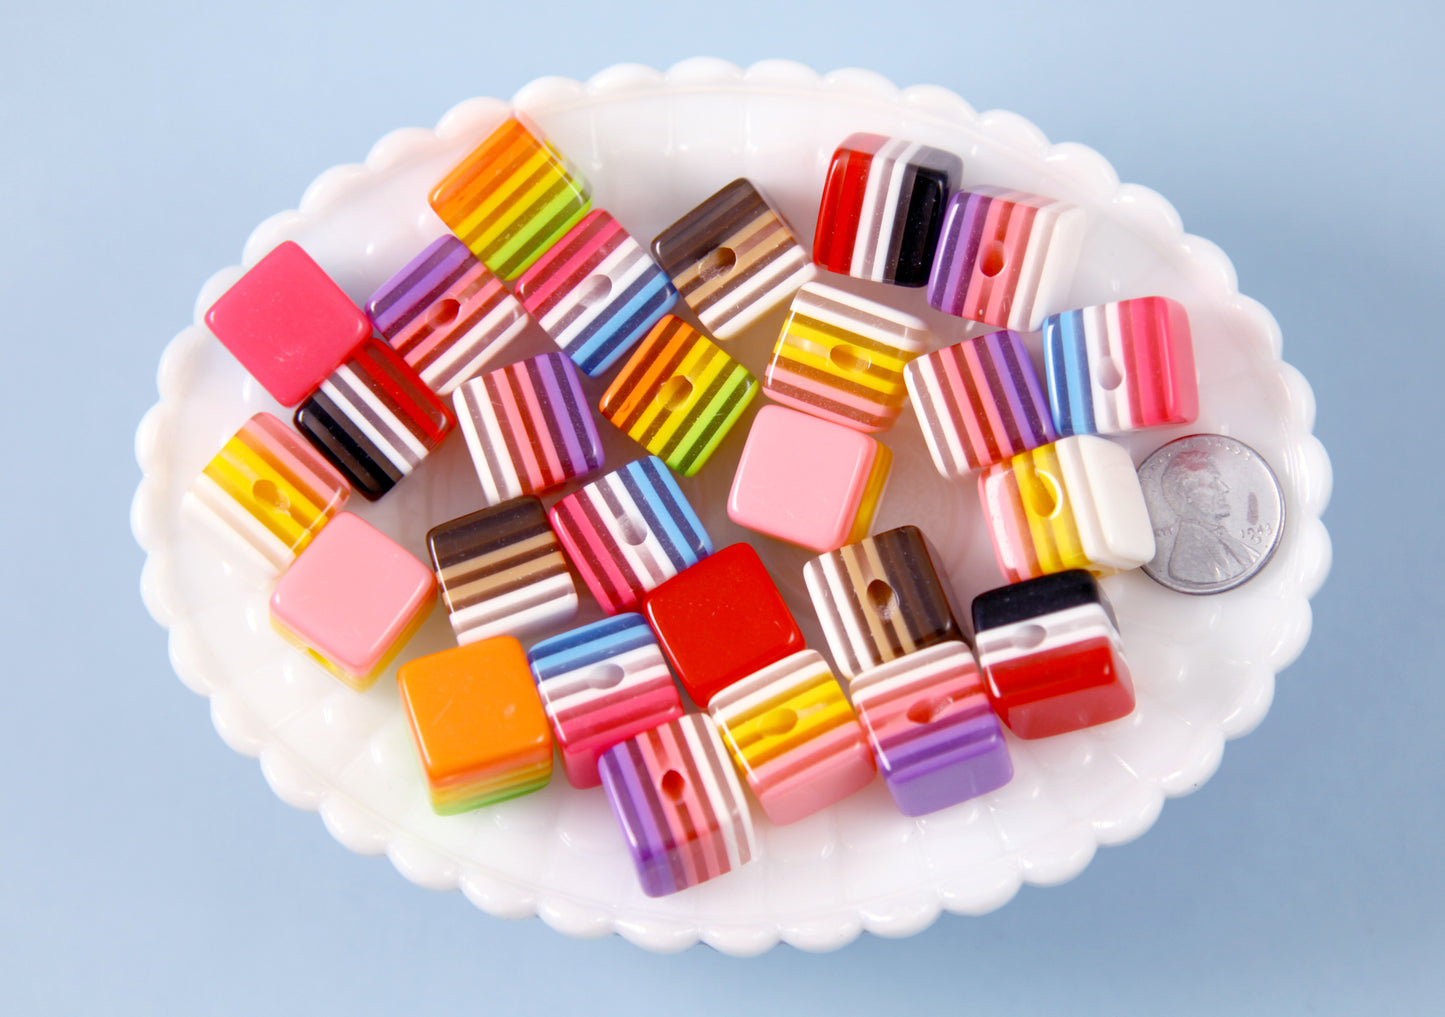 Striped Beads - 15mm Cube Juicy Stripes Colorful Chunky Resin Beads - 12 pc set